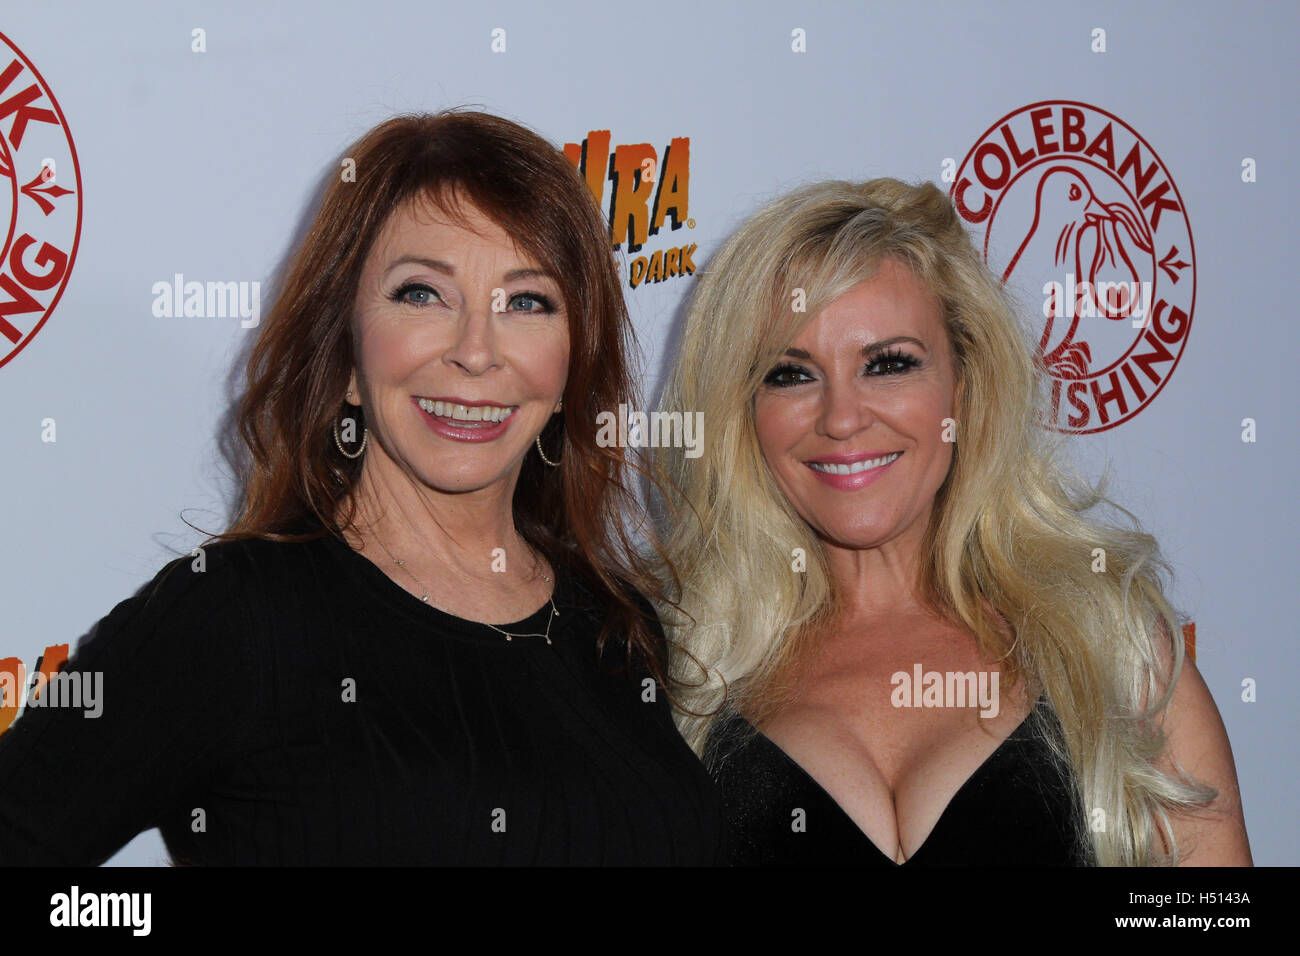 Hollywood, Ca. 18th Oct, 2016. Cassandra Peterson, Bridget Marquardt attends the launch party for Cassandra Peterson's new book 'Elvira, Mistress Of The Dark' at the Hollywood Roosevelt Hotel on October 18, 2016 in Hollywood, California. ( Credit:  Parisa Afsahi/Media Punch)./Alamy Live News Stock Photo